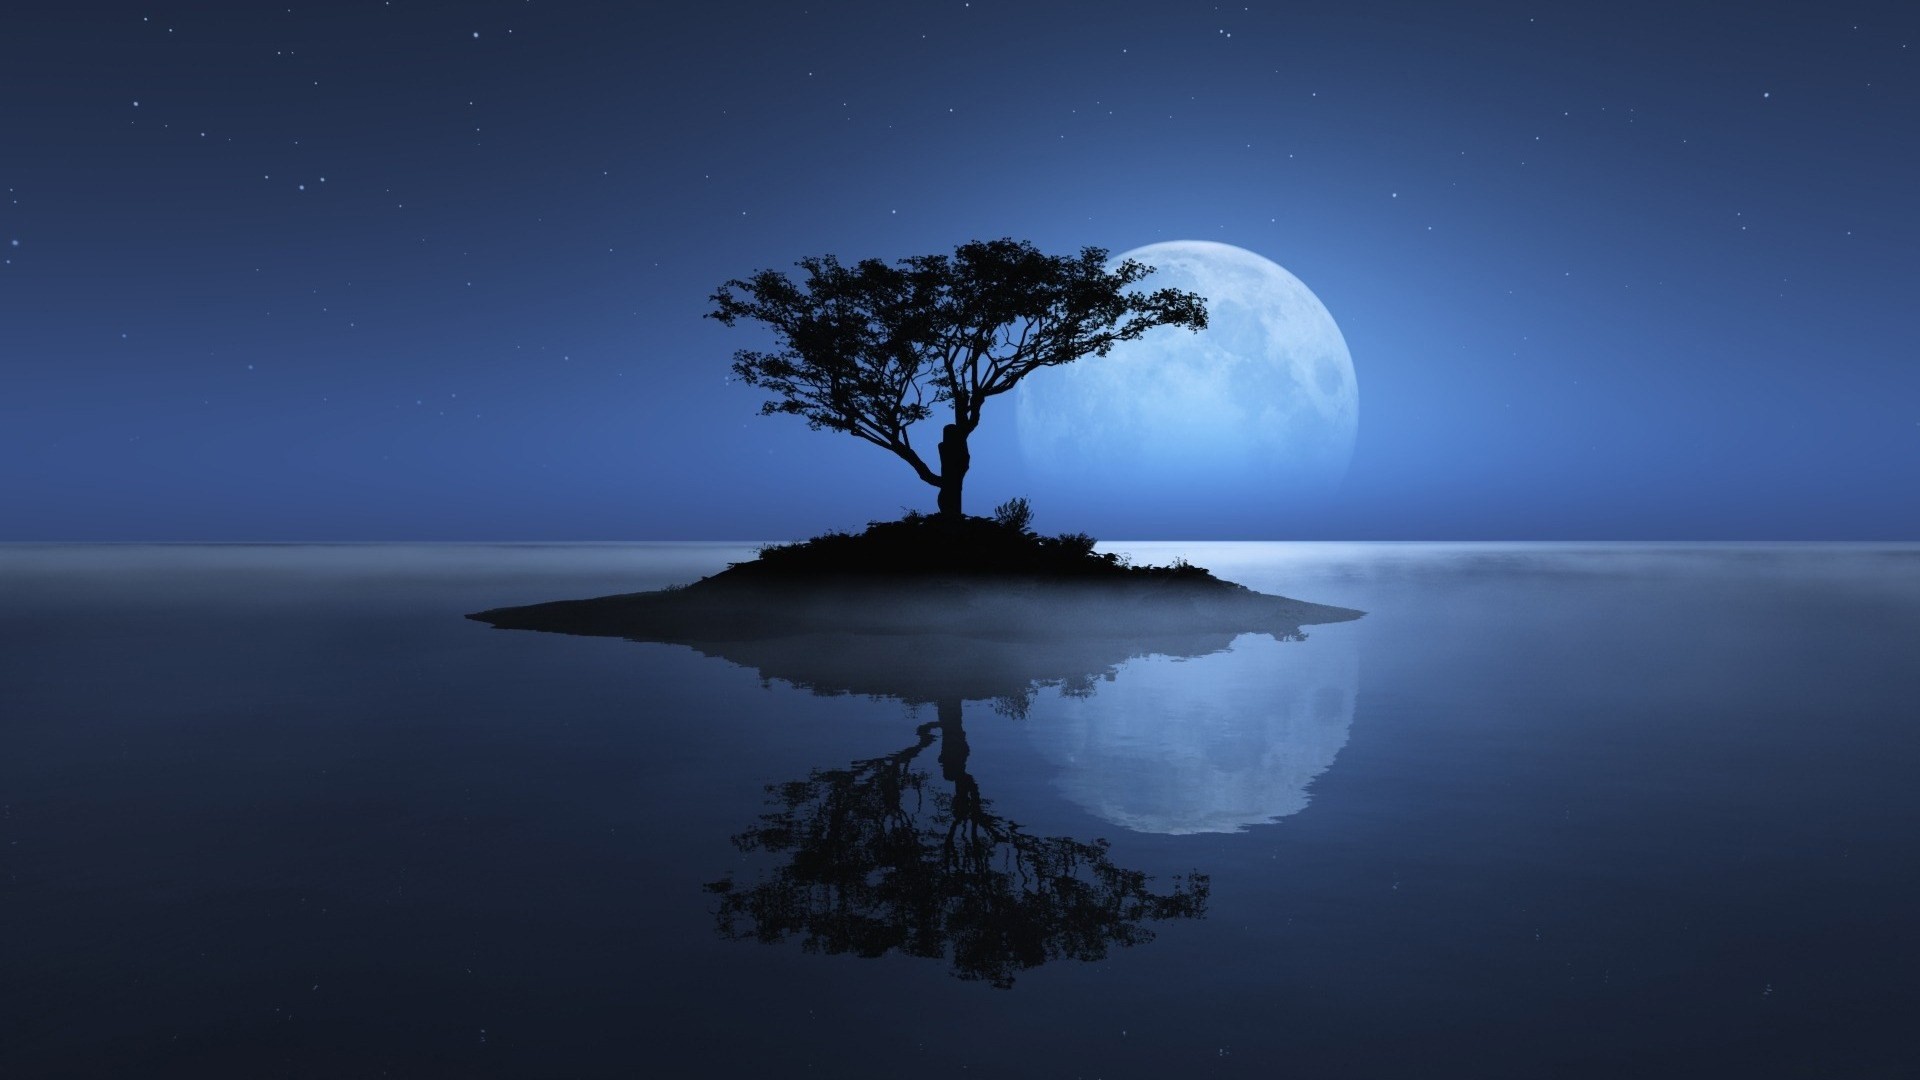 General 1920x1080 landscape nature trees Moon water river